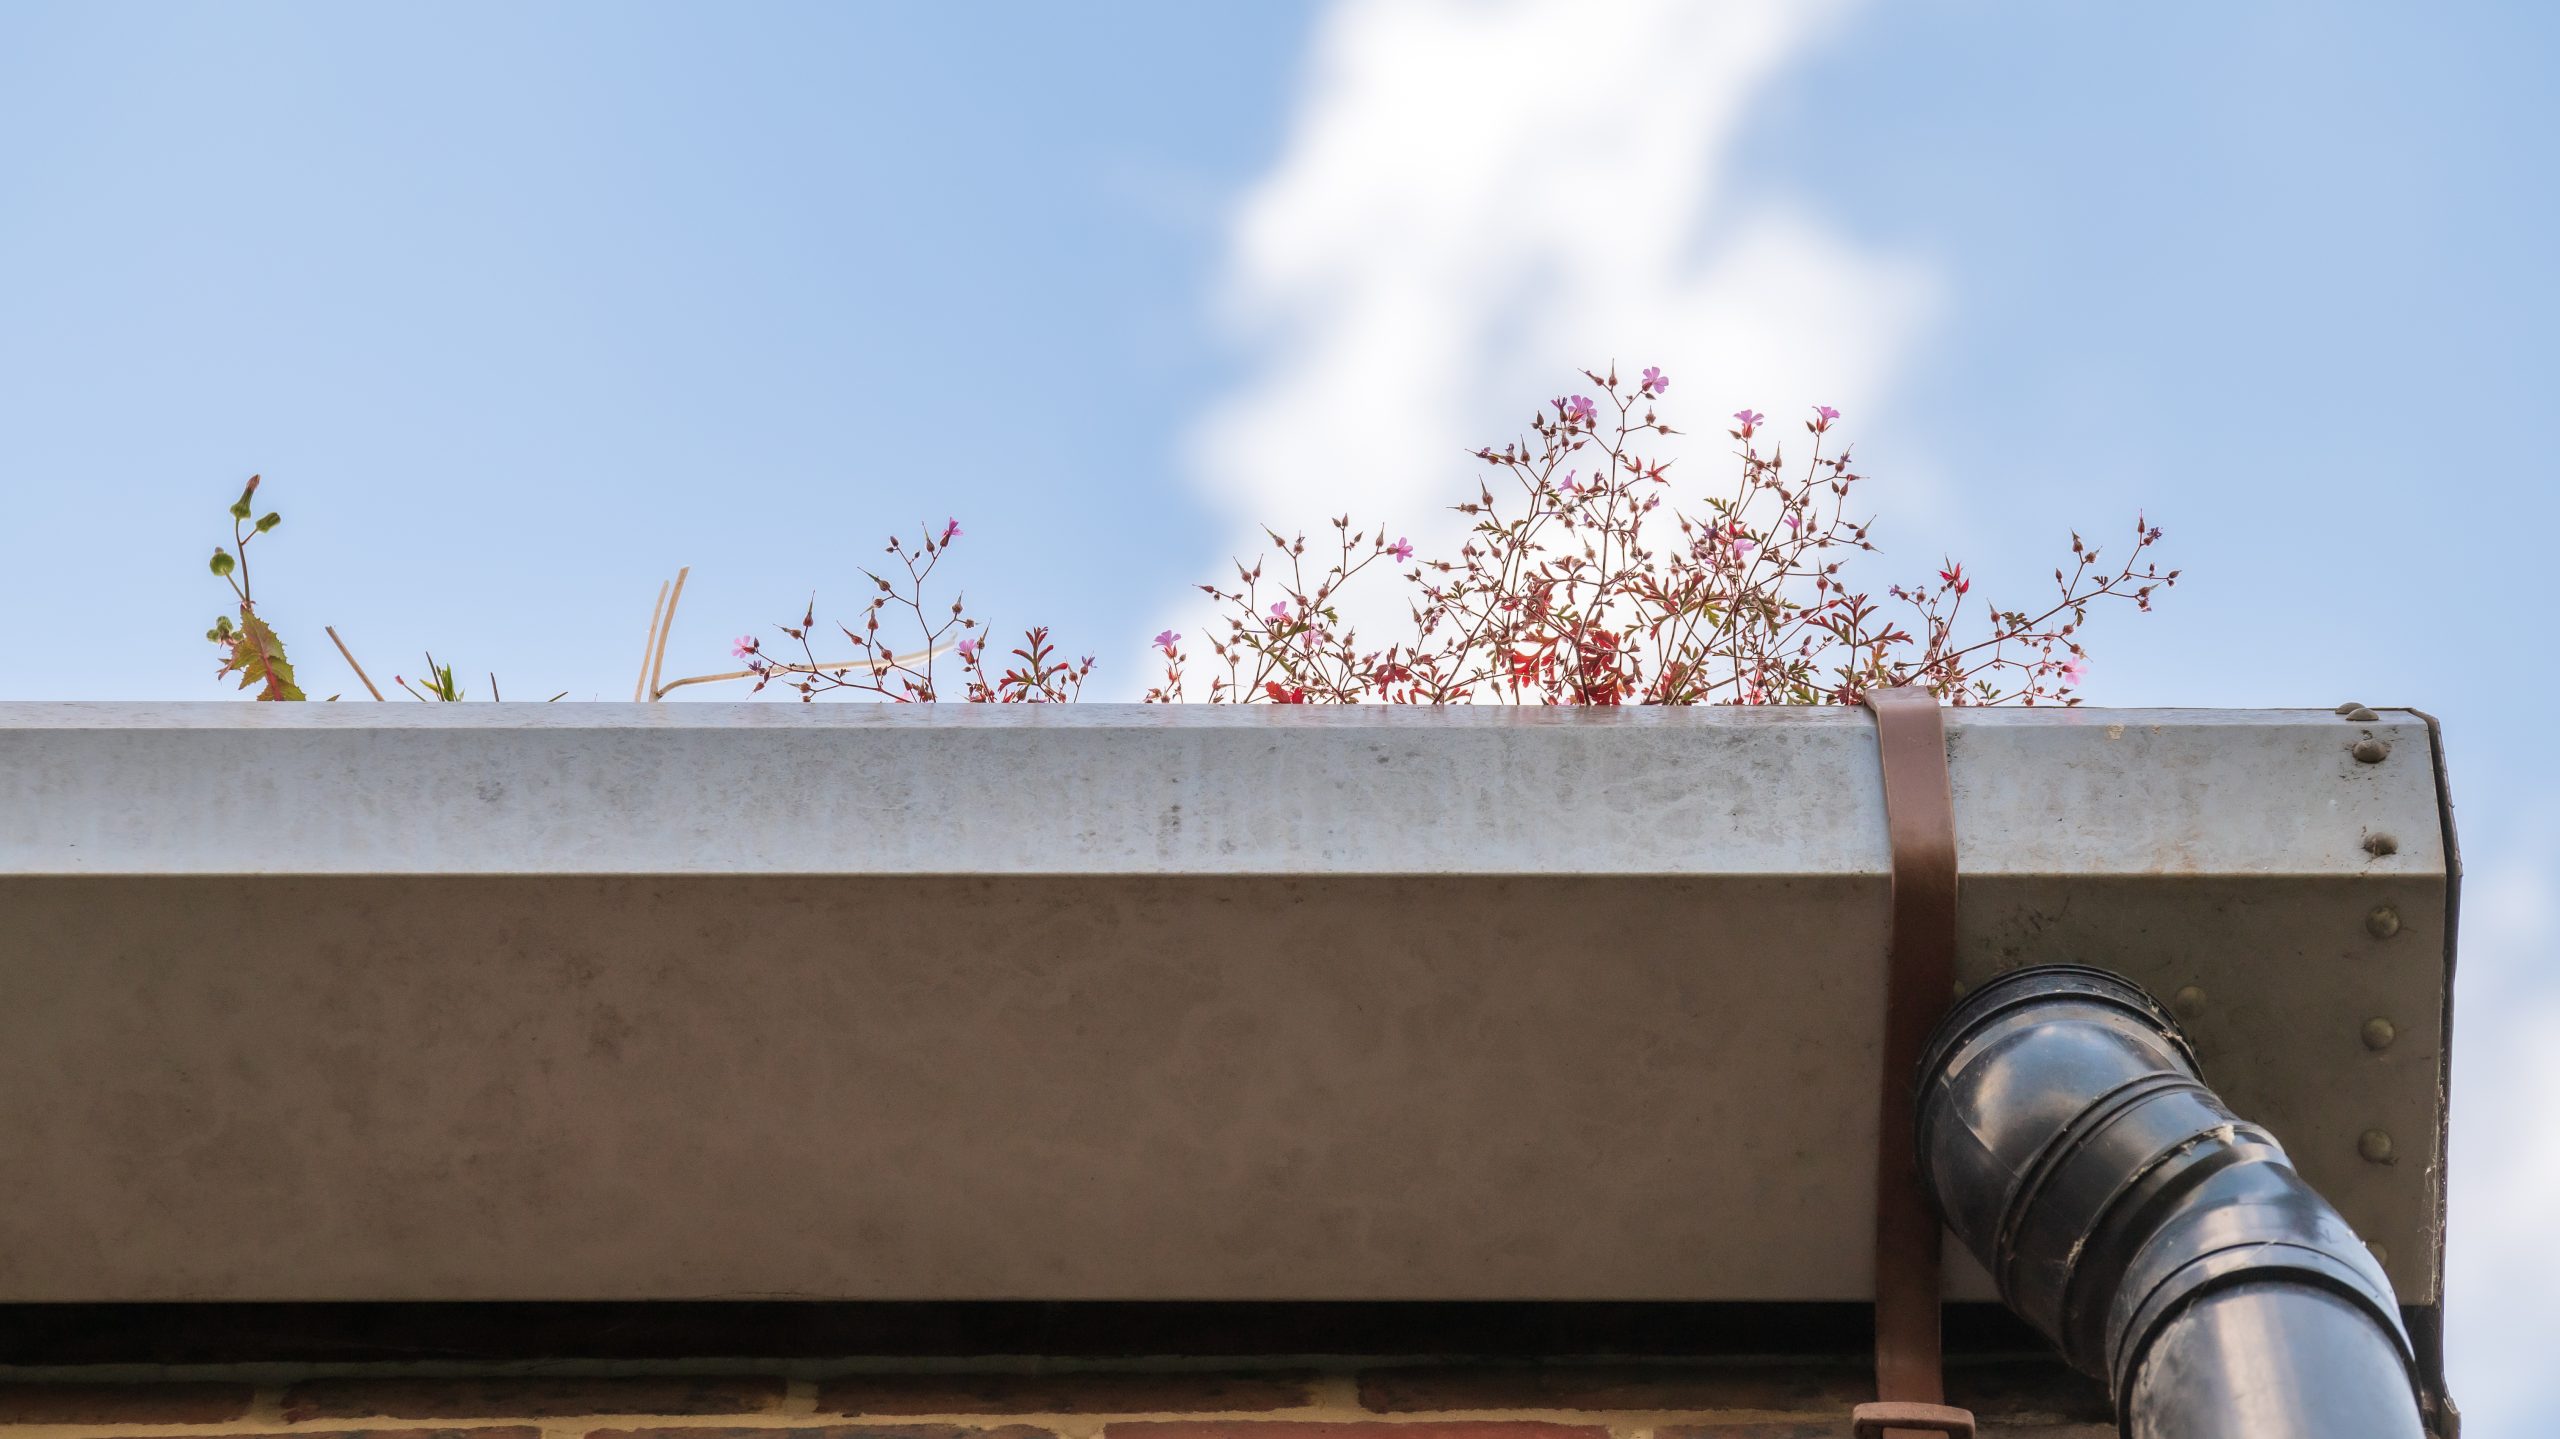 Bottom angle of larger gutters with plants